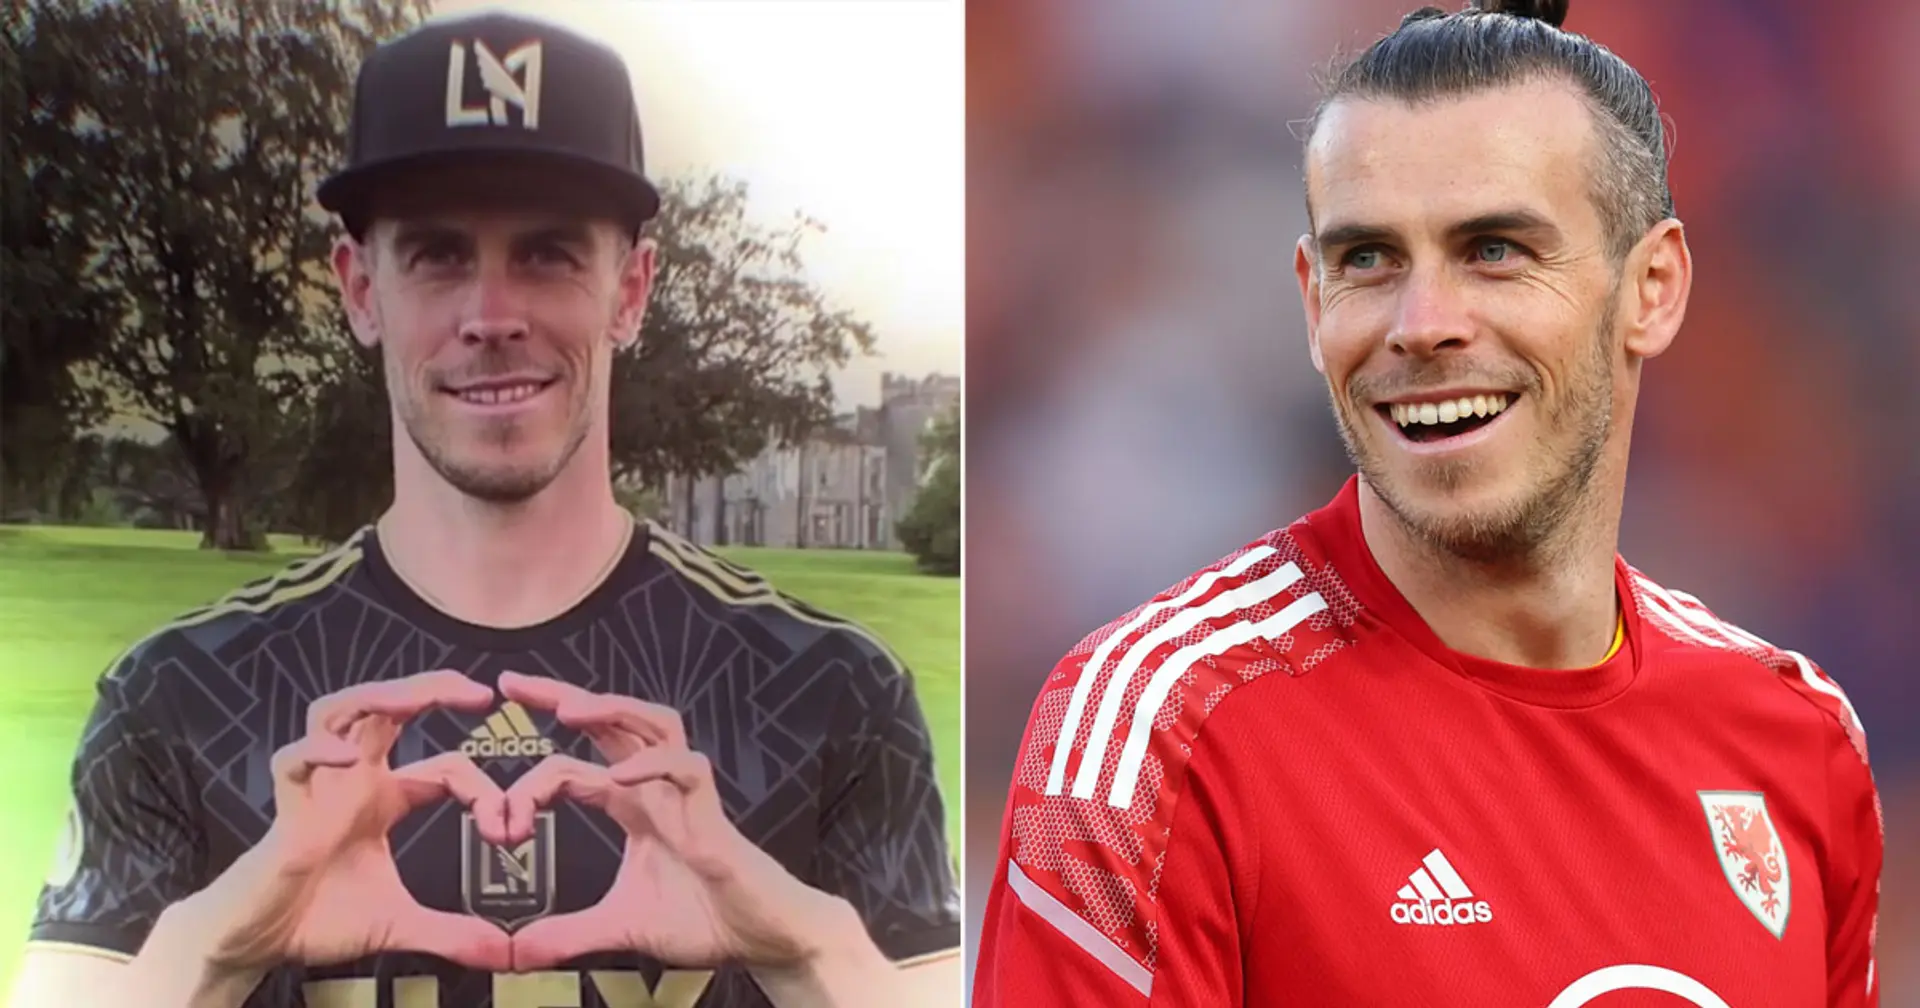 OFFICIAL: Gareth Bale confirms move to Los Angeles FC